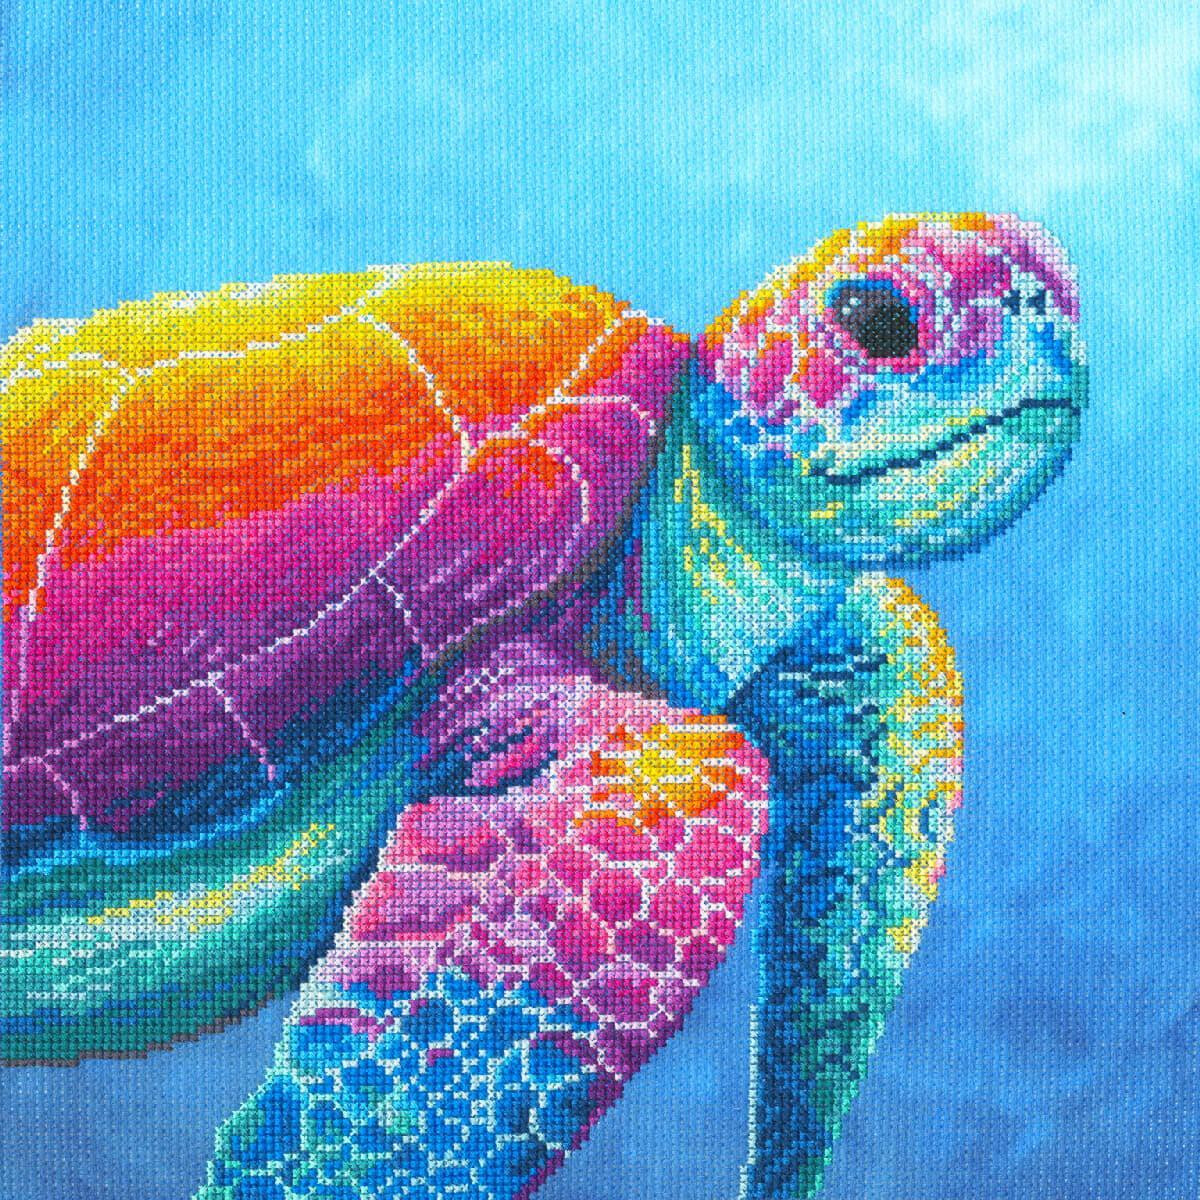 A vibrant illustration of a sea turtle against an ocean...